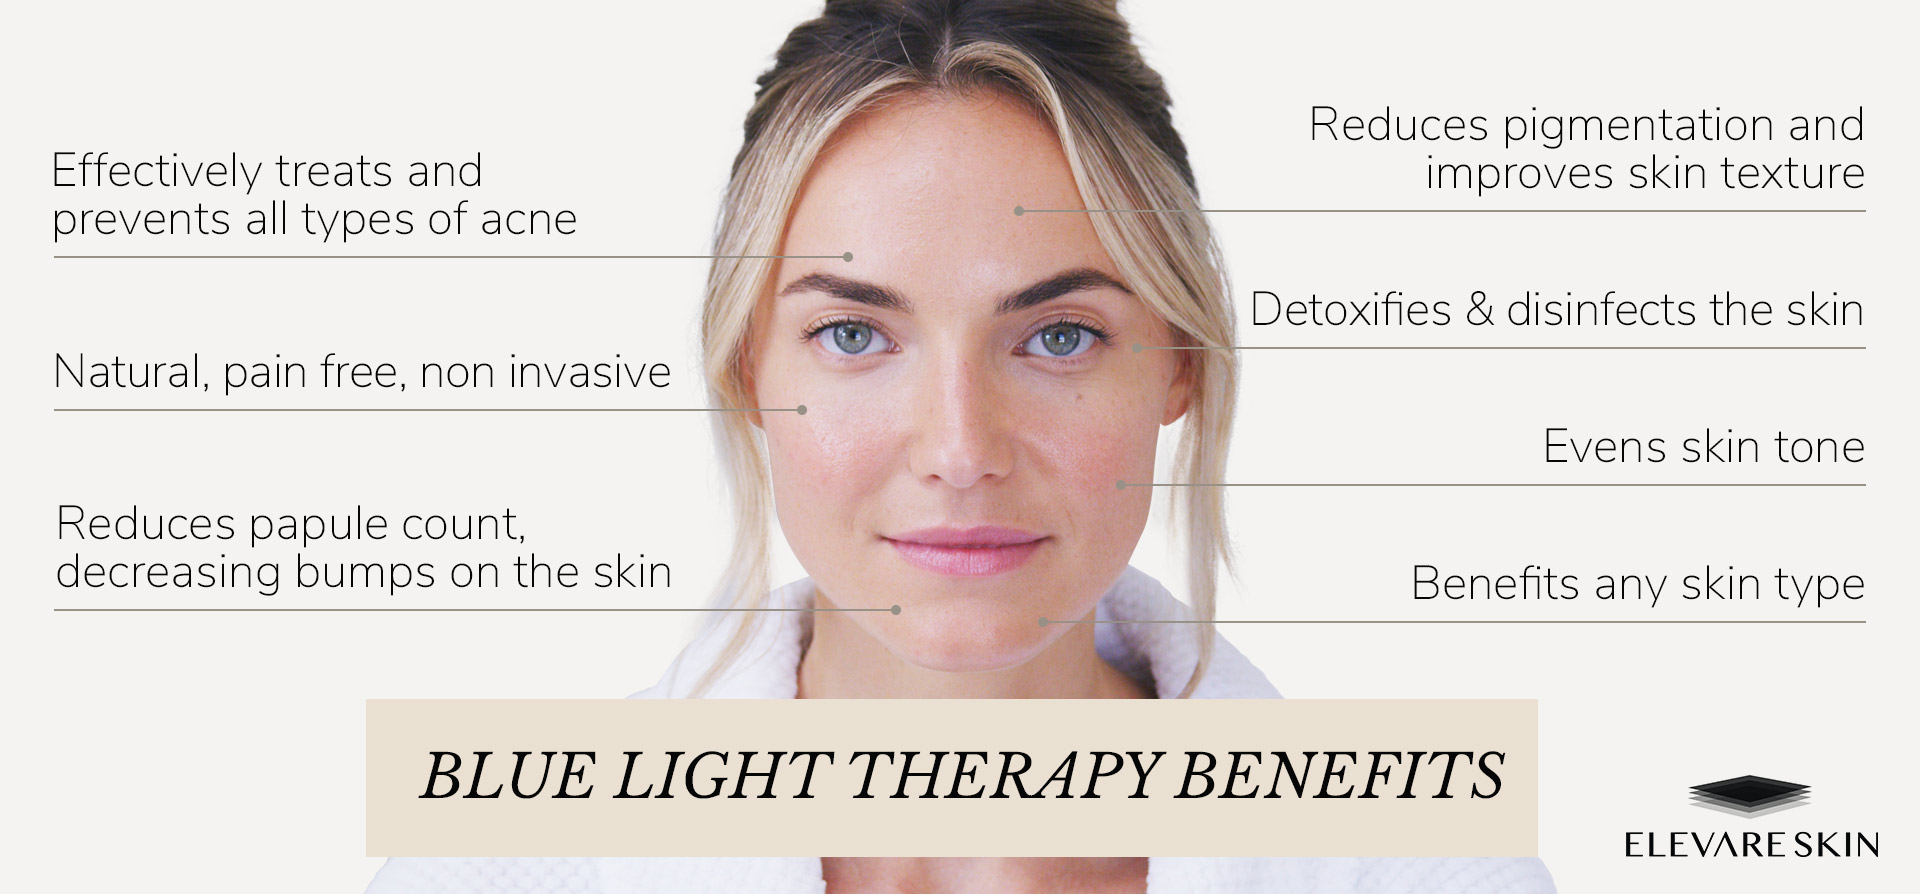 Blue Light Therapy Benefits